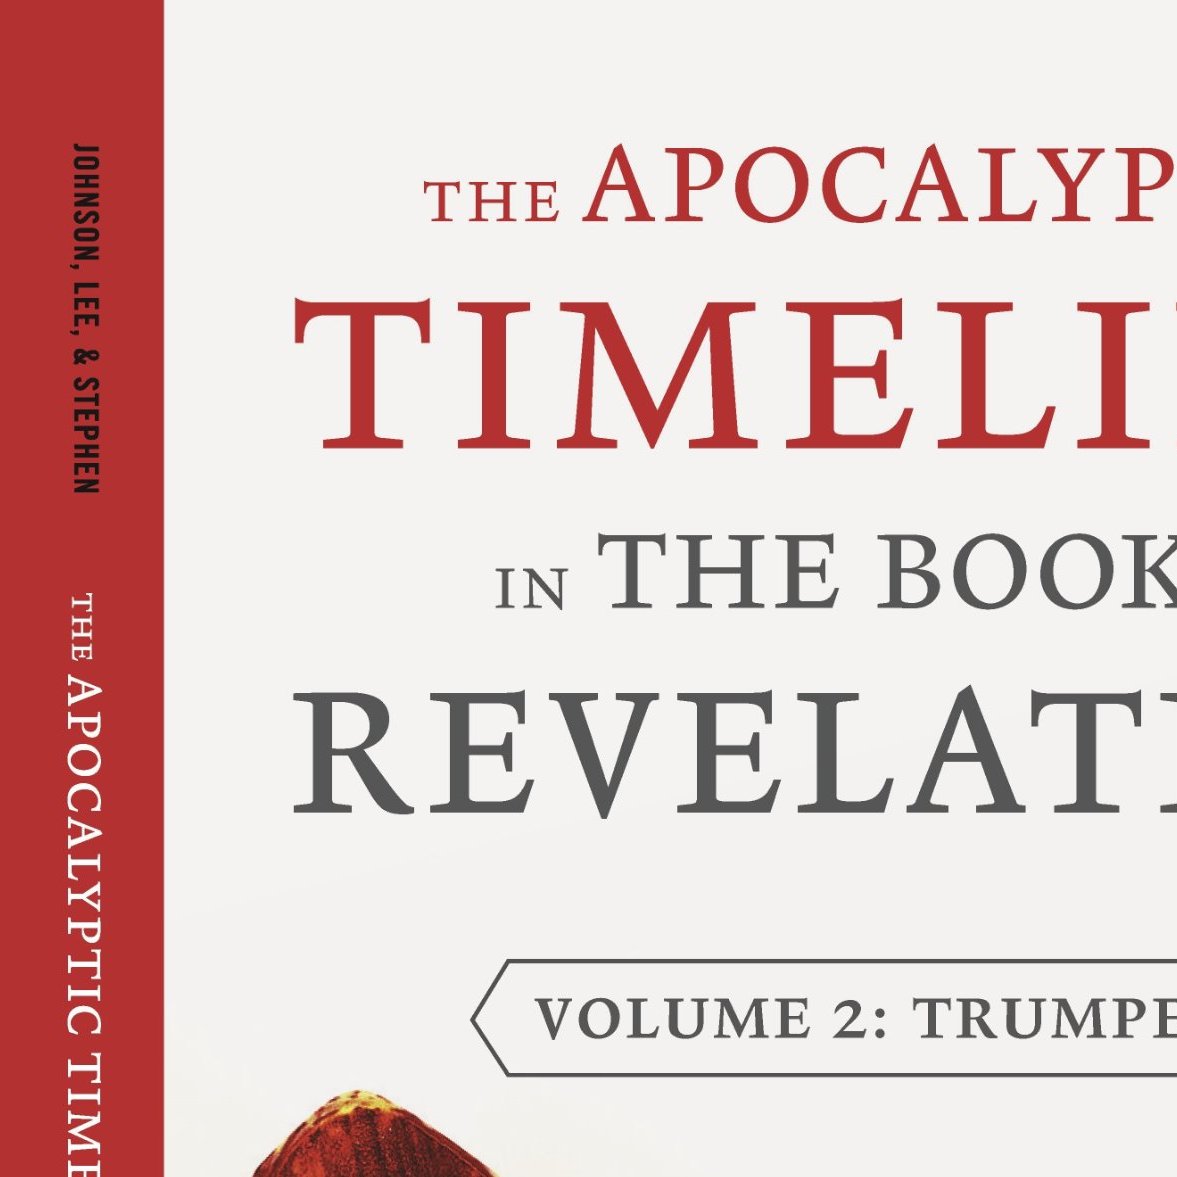 #Jesus is coming back. Await for the
Rapture. This world will be renewed when He comes back. Apocalyptic Timeline in the Book of Revelation.